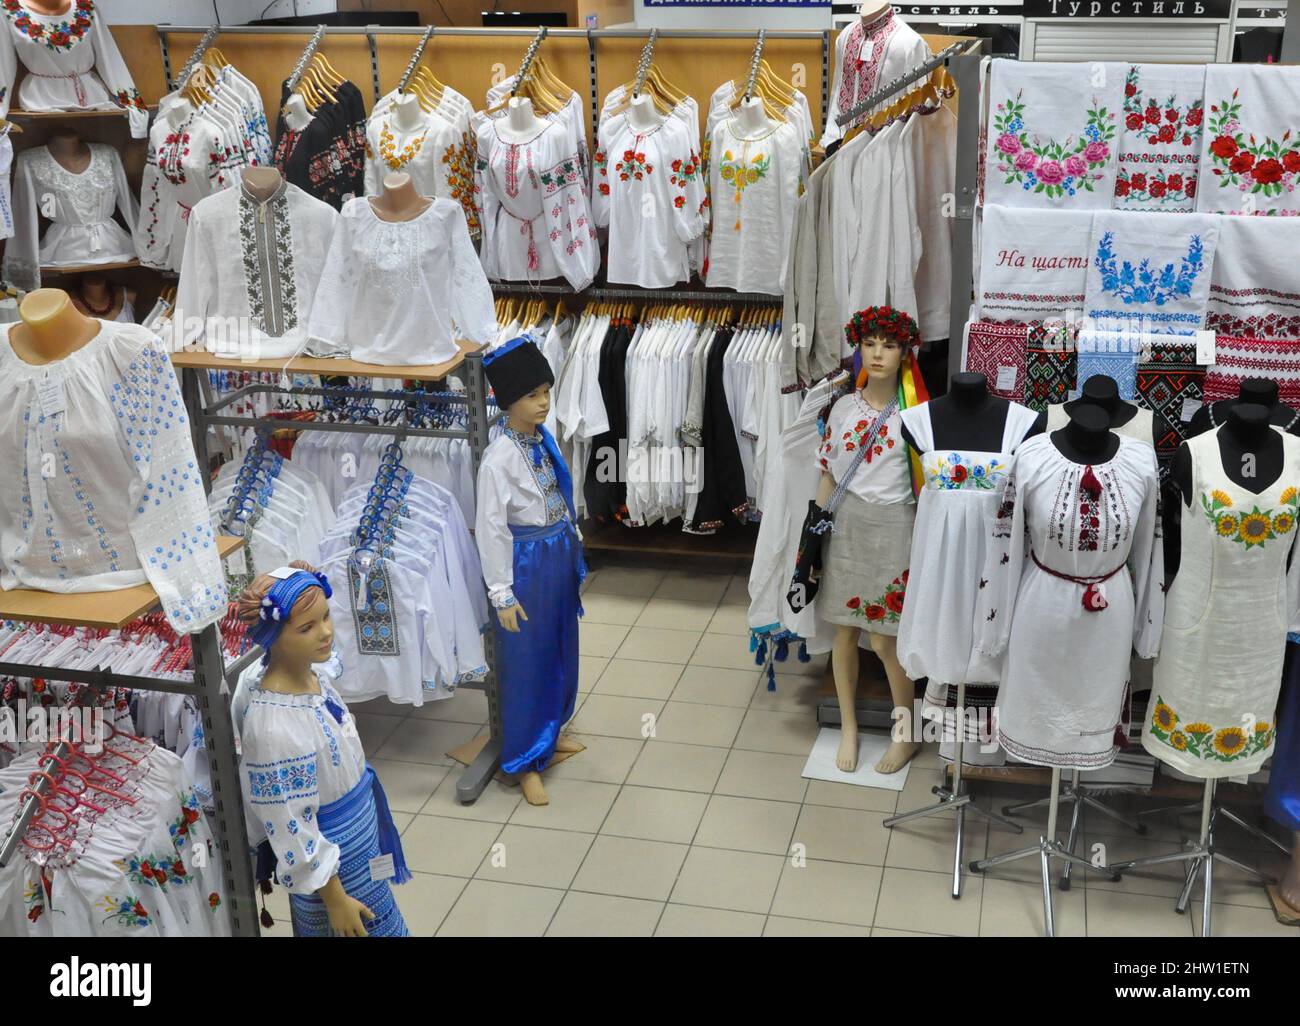 A shop selling traditional Ukrainian clothes and costumes in Kyiv (Kiev) city centre. Stock Photo